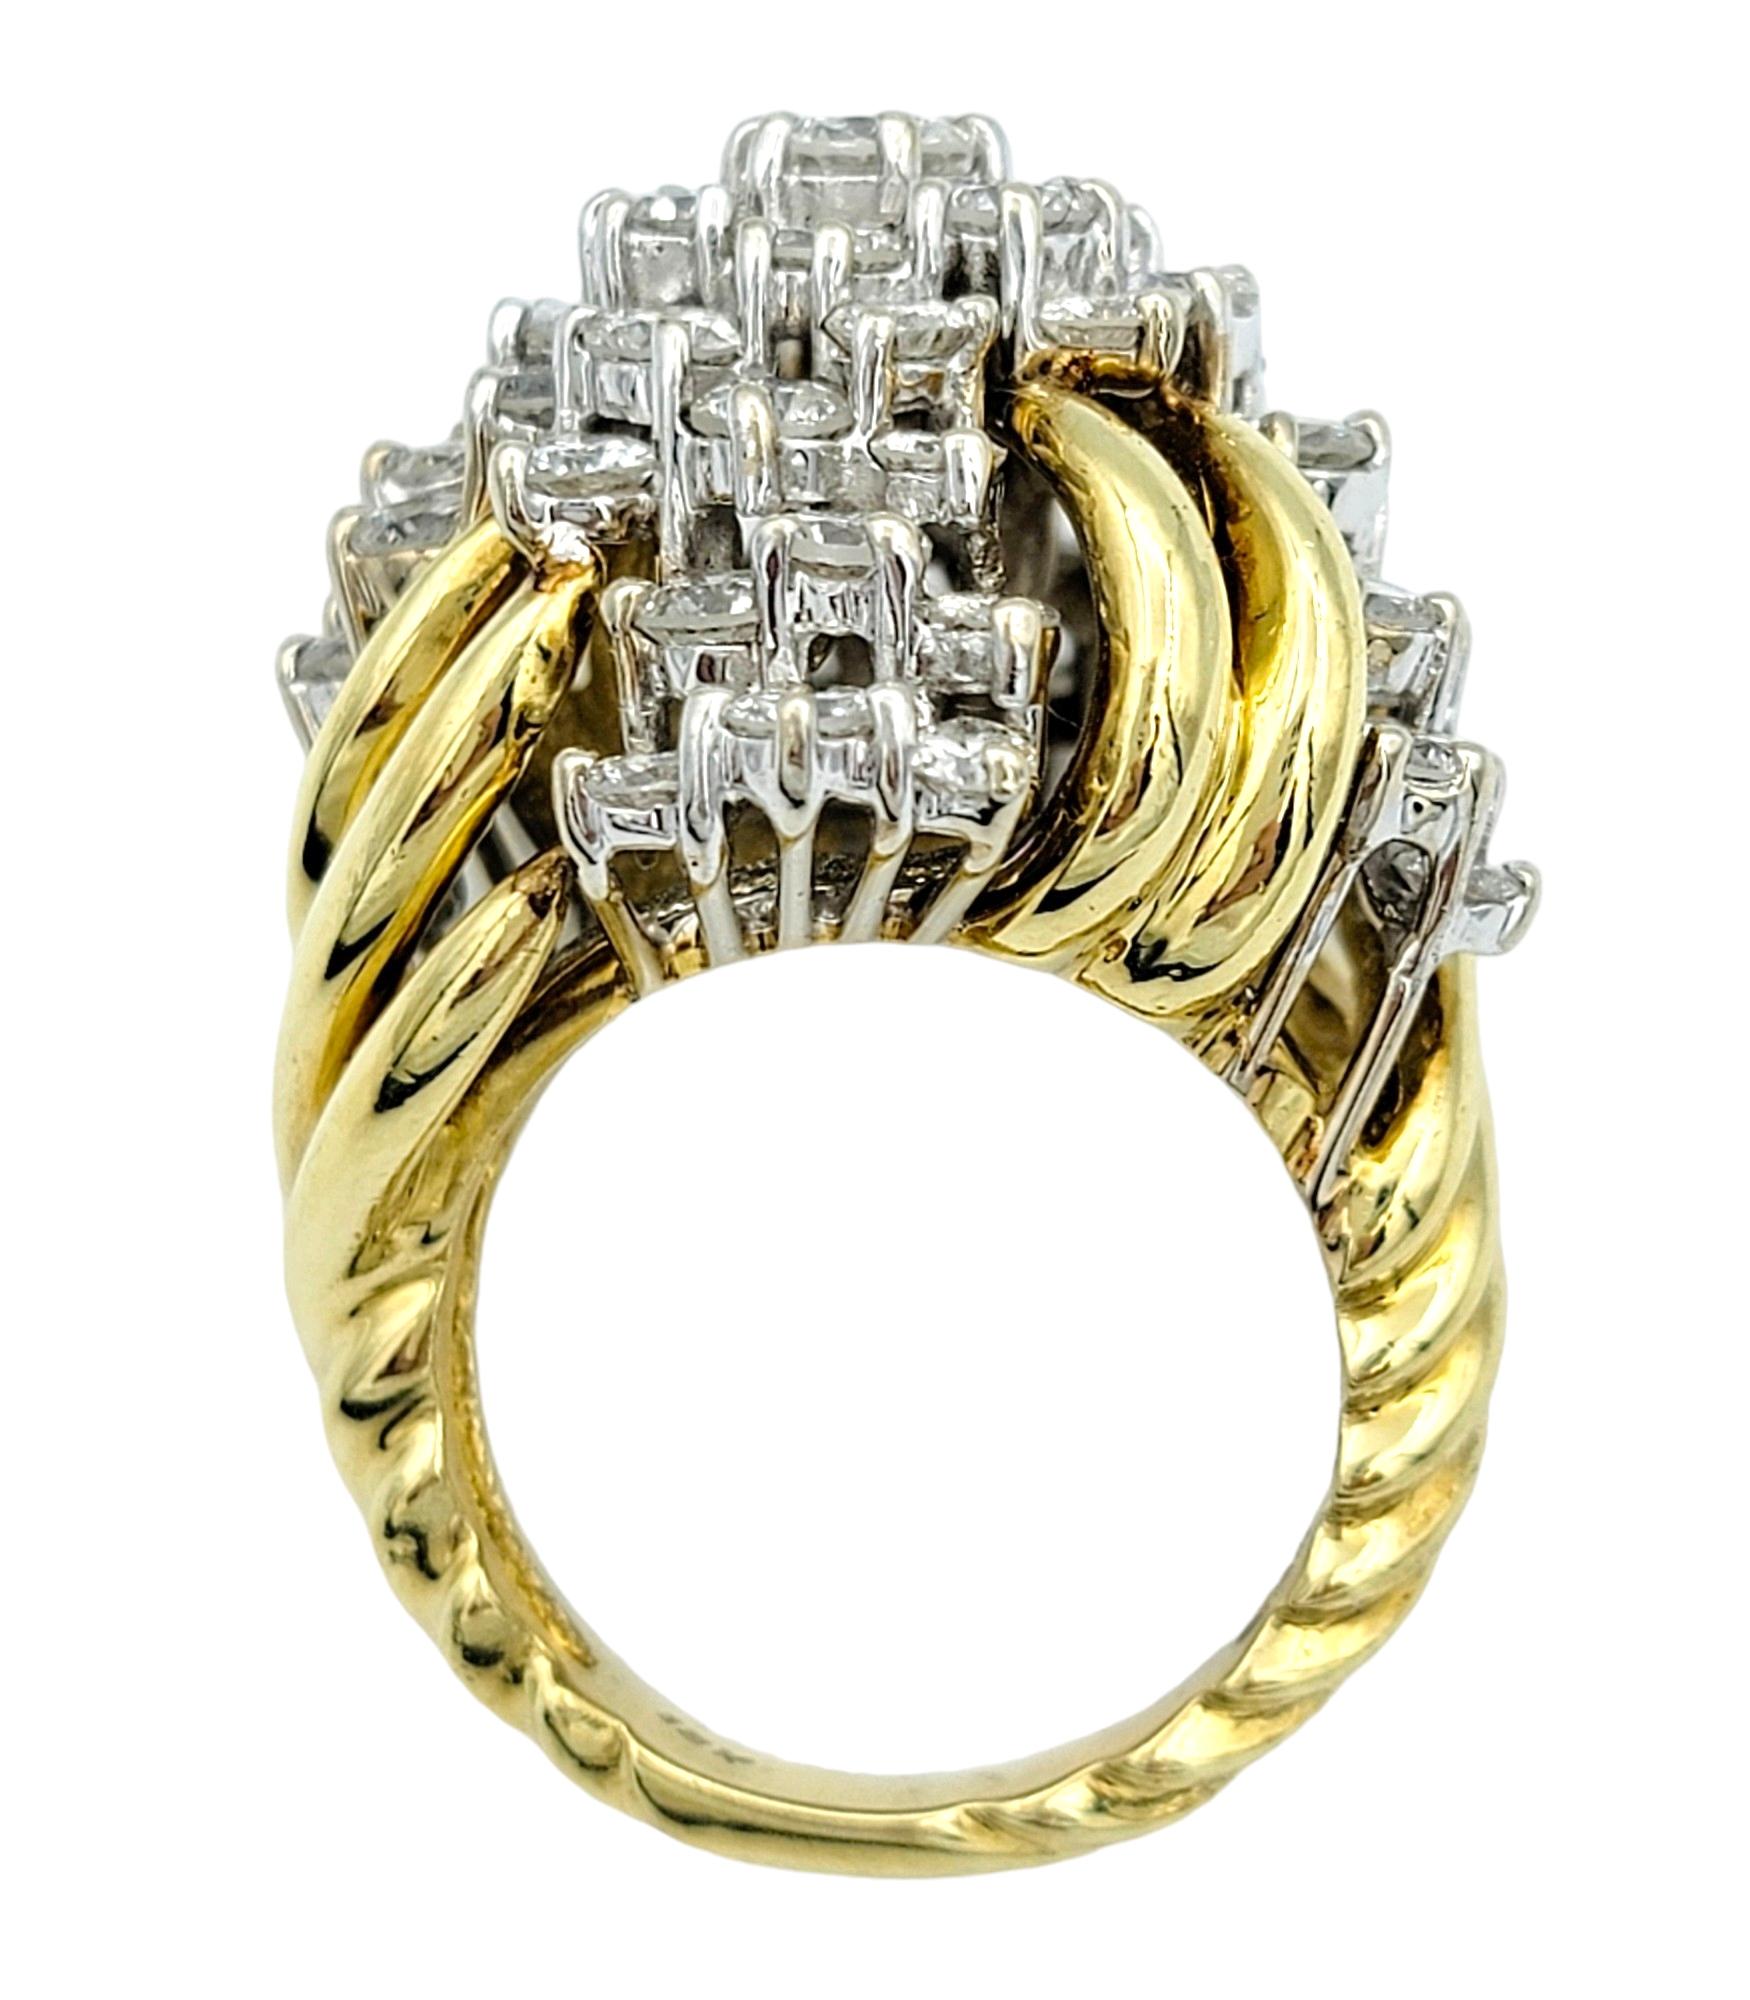 4.50 Carat Total Round Diamond Clustered Dome Cocktail Ring 18 Karat Yellow Gold In Good Condition For Sale In Scottsdale, AZ